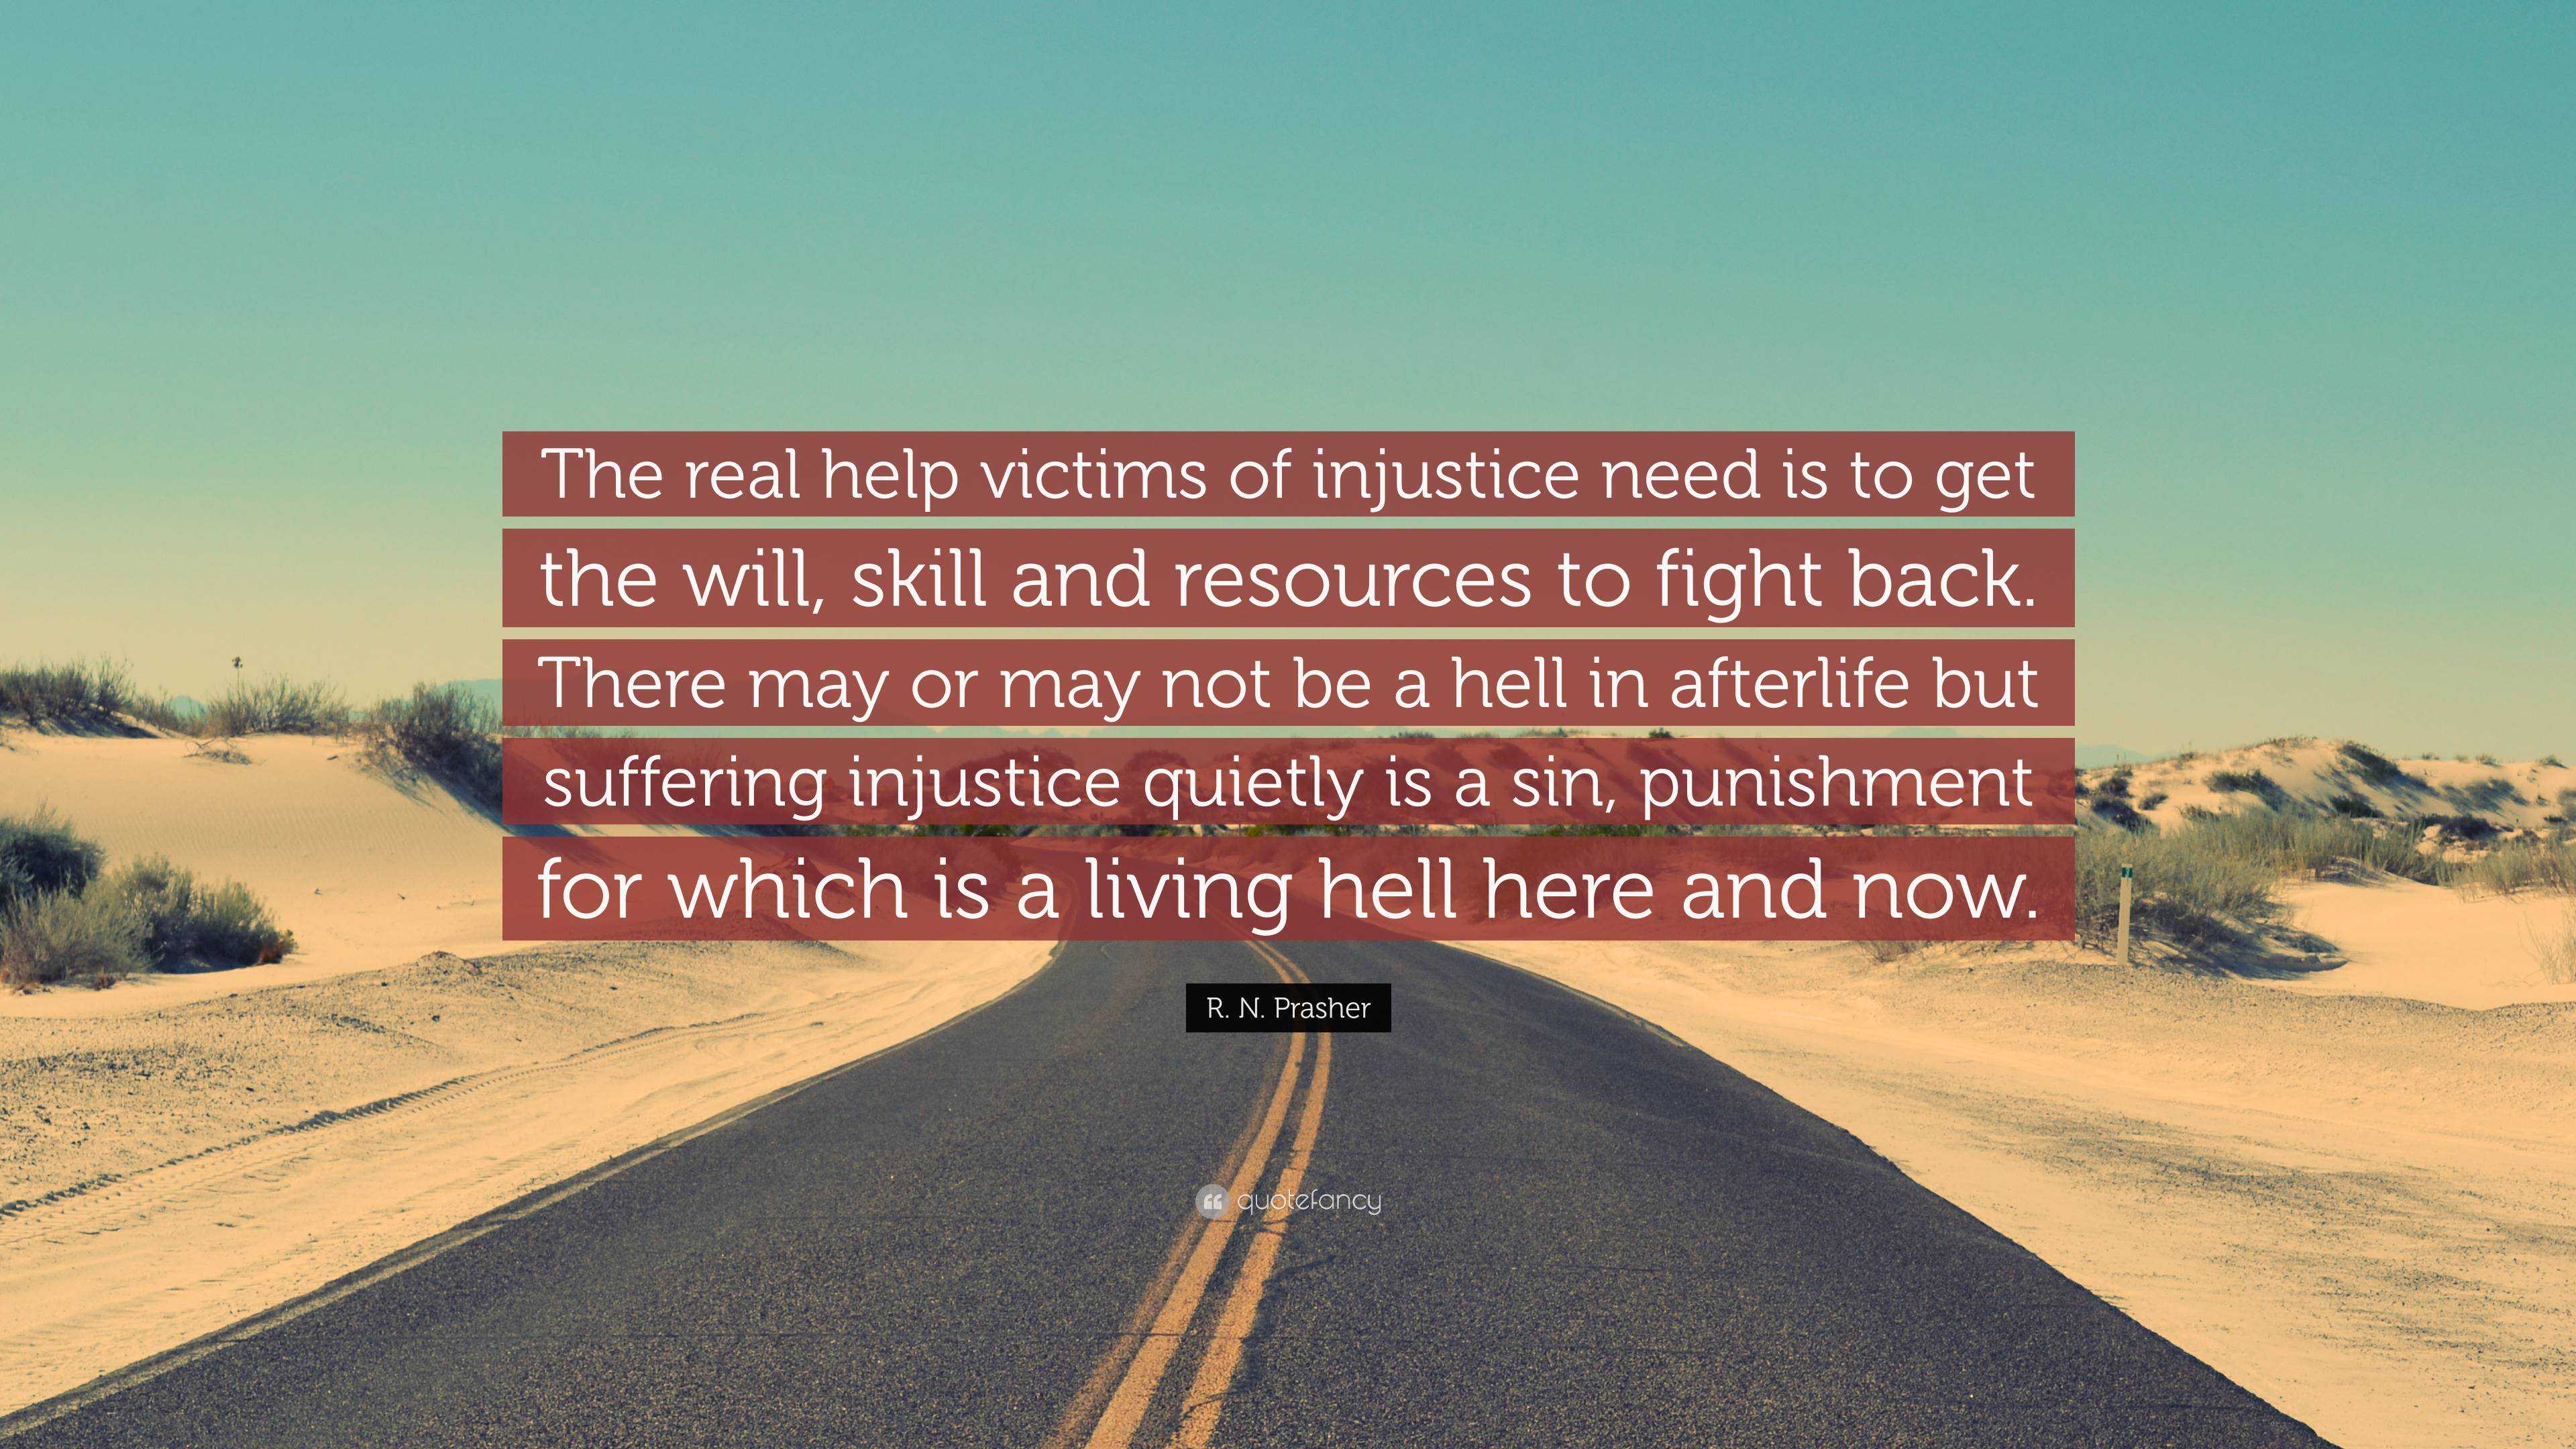 R. N. Prasher Quote: “The real help victims of injustice need is to get the  will